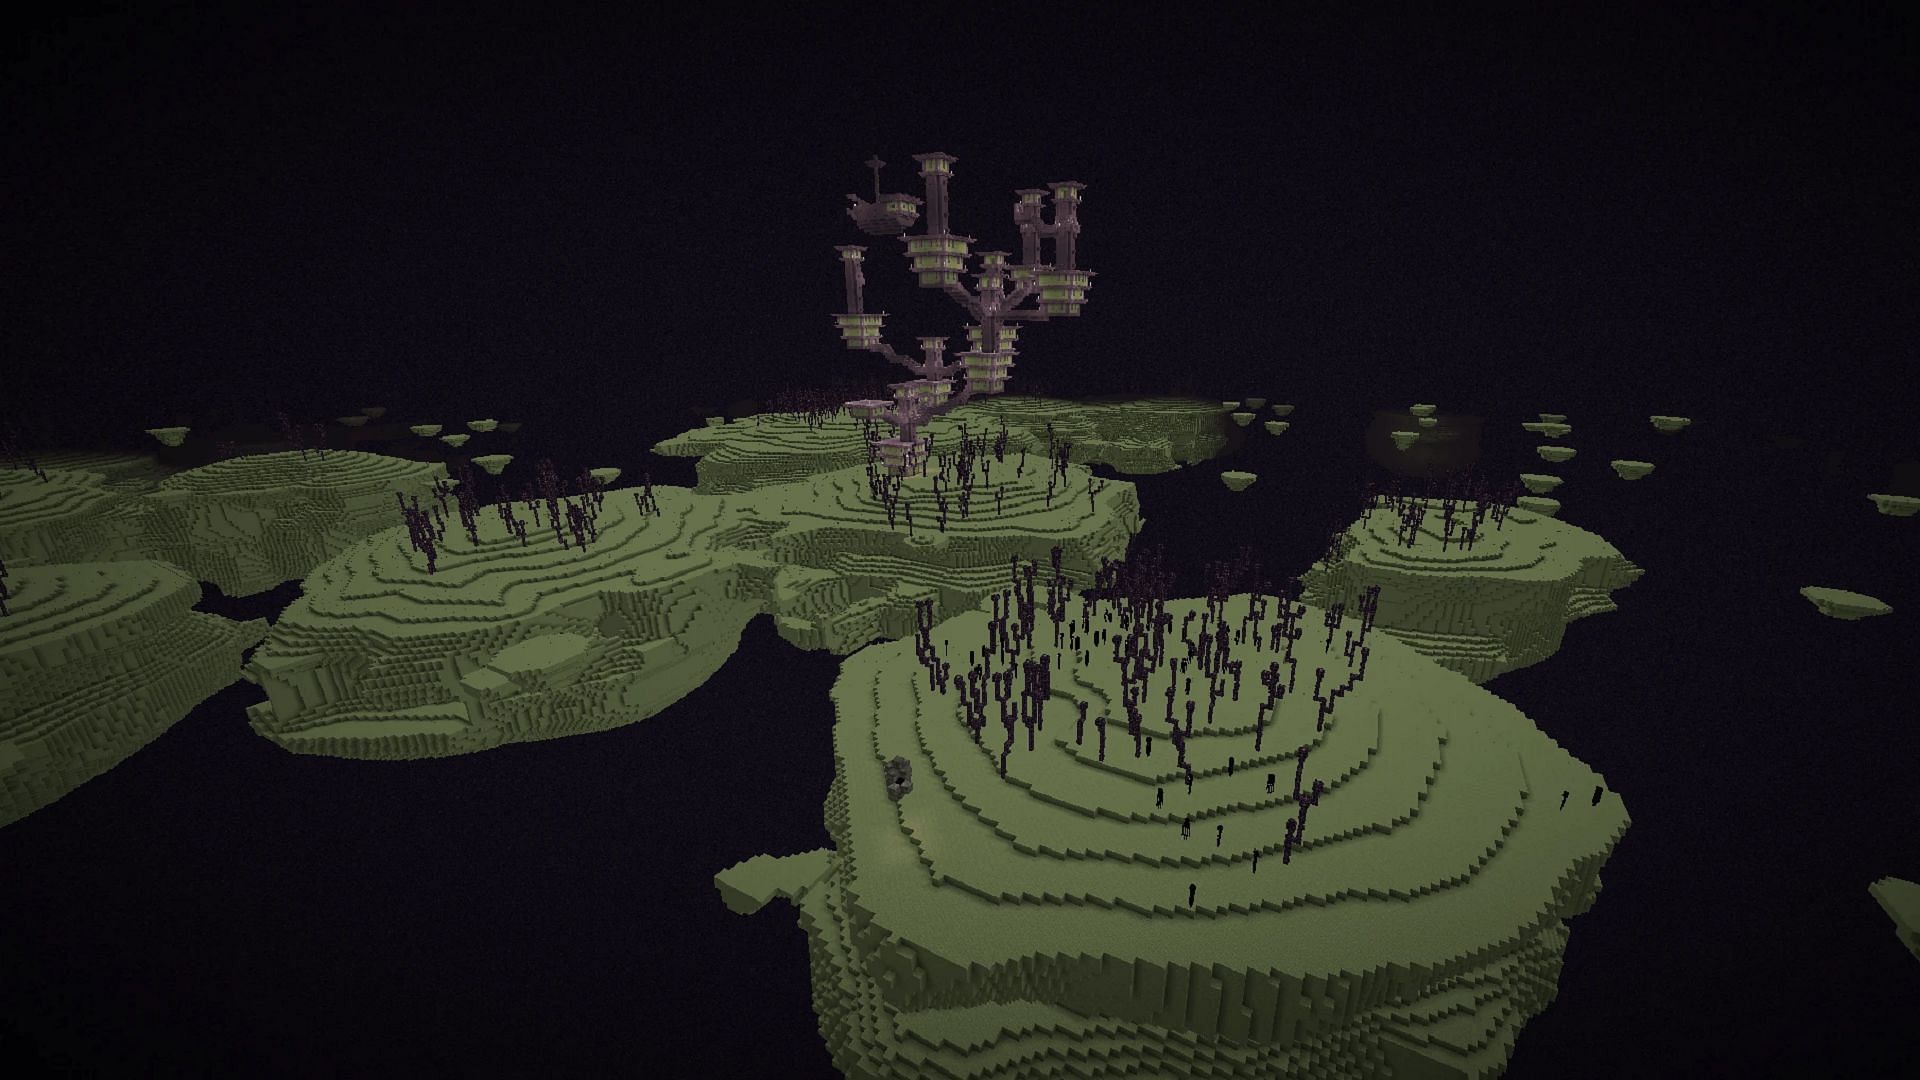 The outer islands of the End dimension in Minecraft (Image via Mojang)